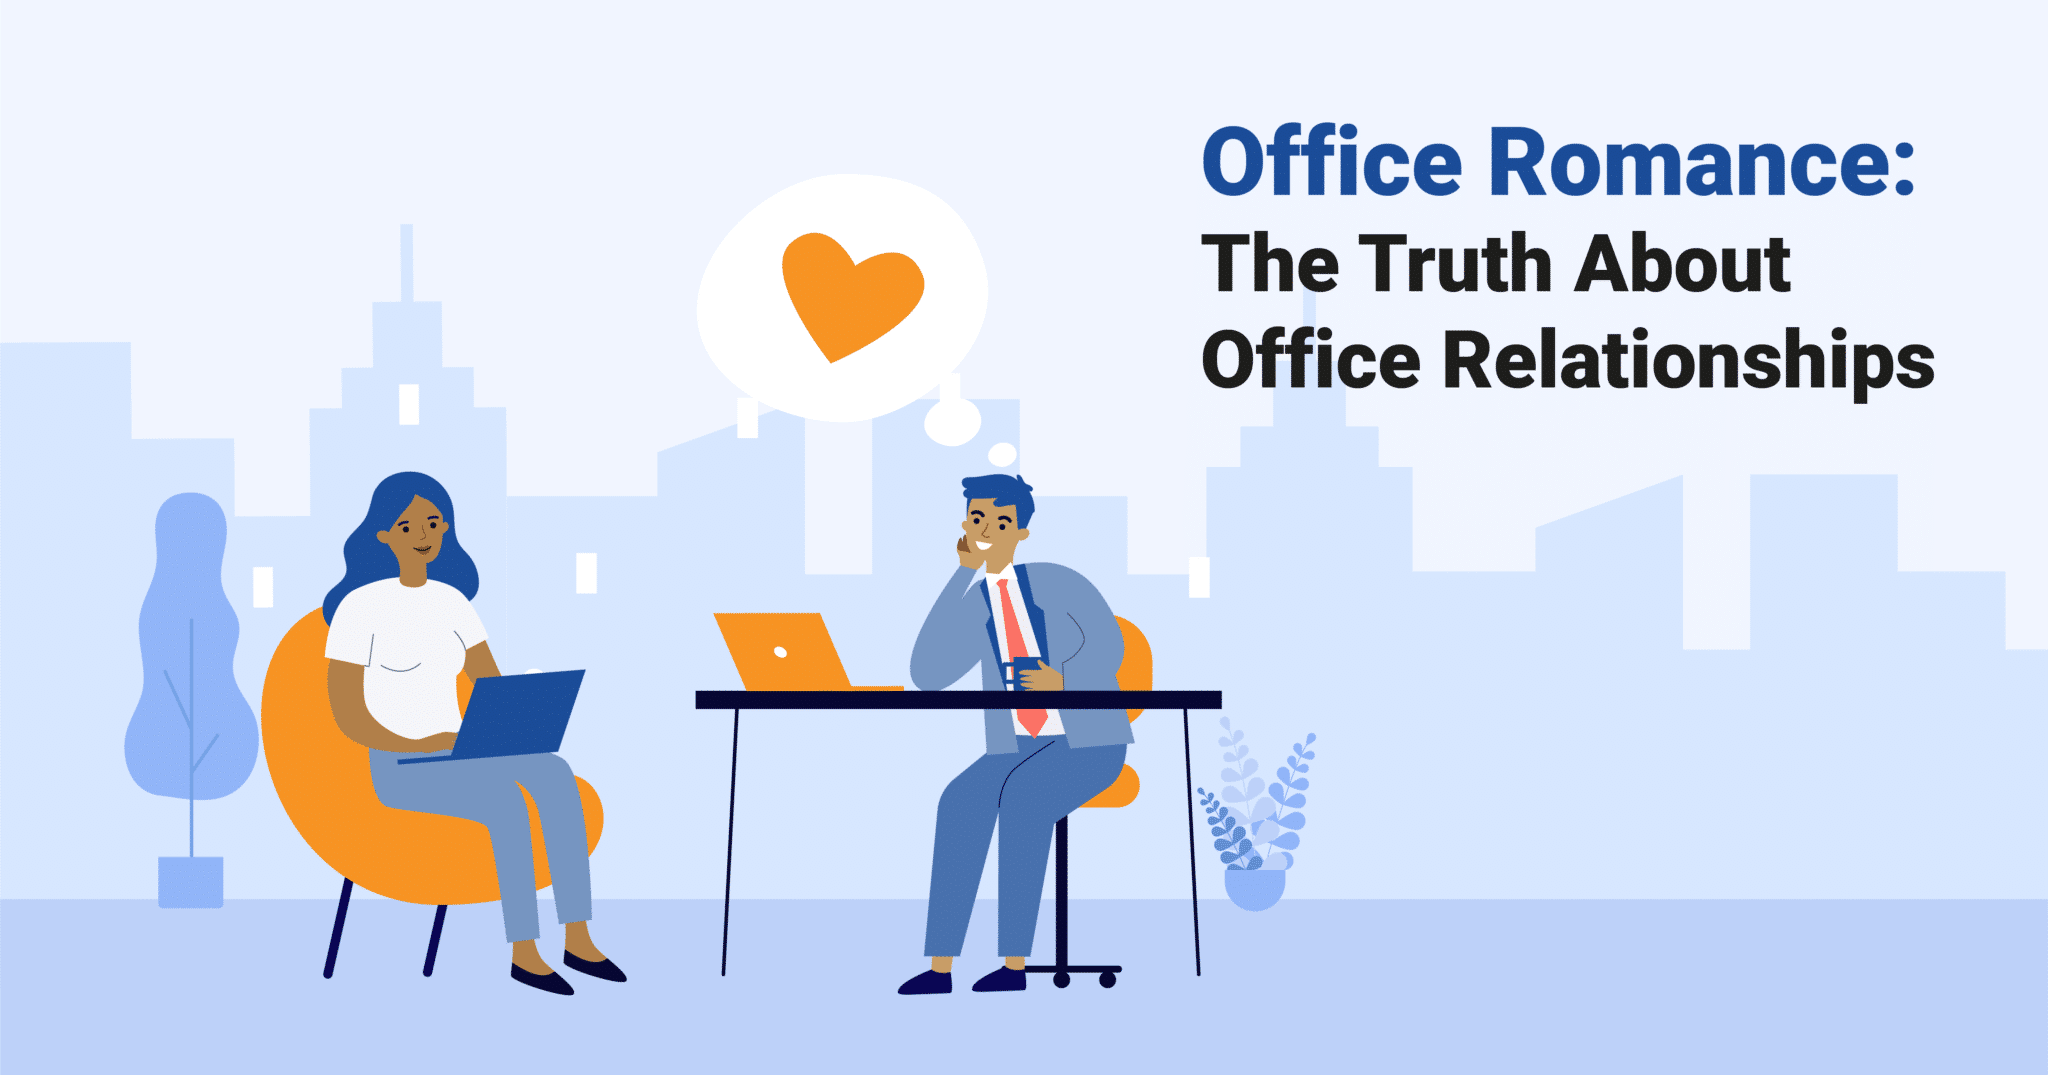 Office Romance: The Truth About Office Relationships